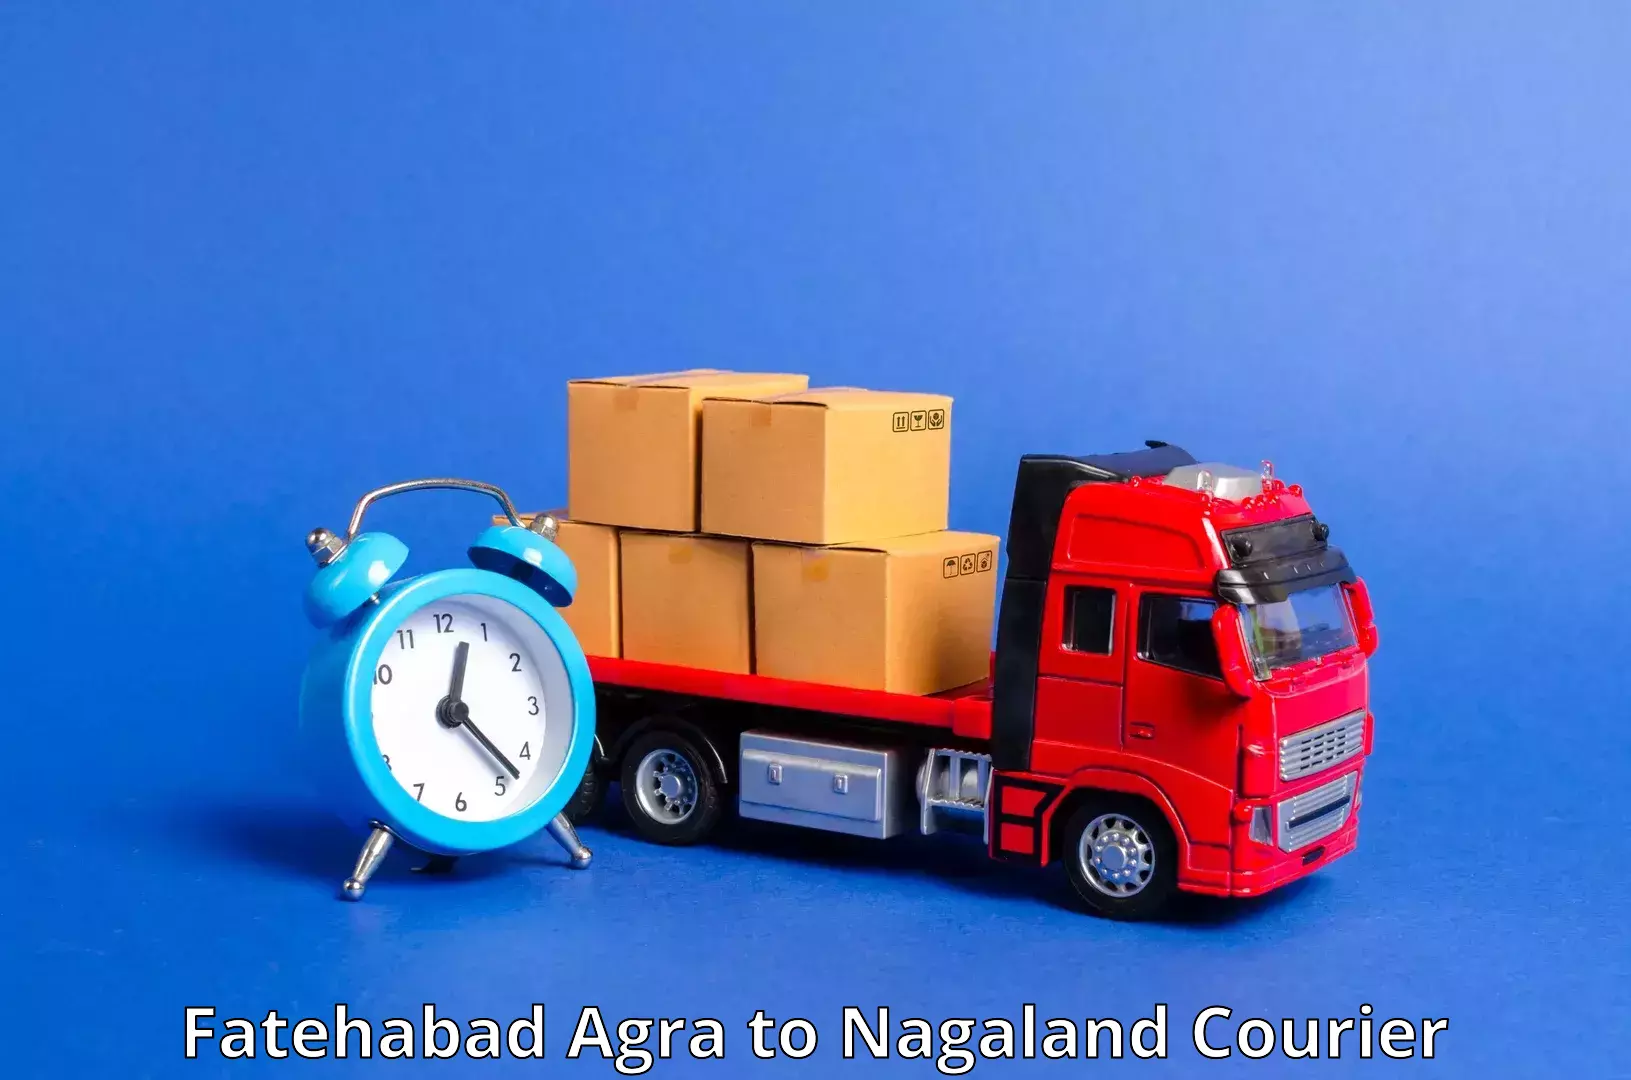 Reliable package handling Fatehabad Agra to Nagaland